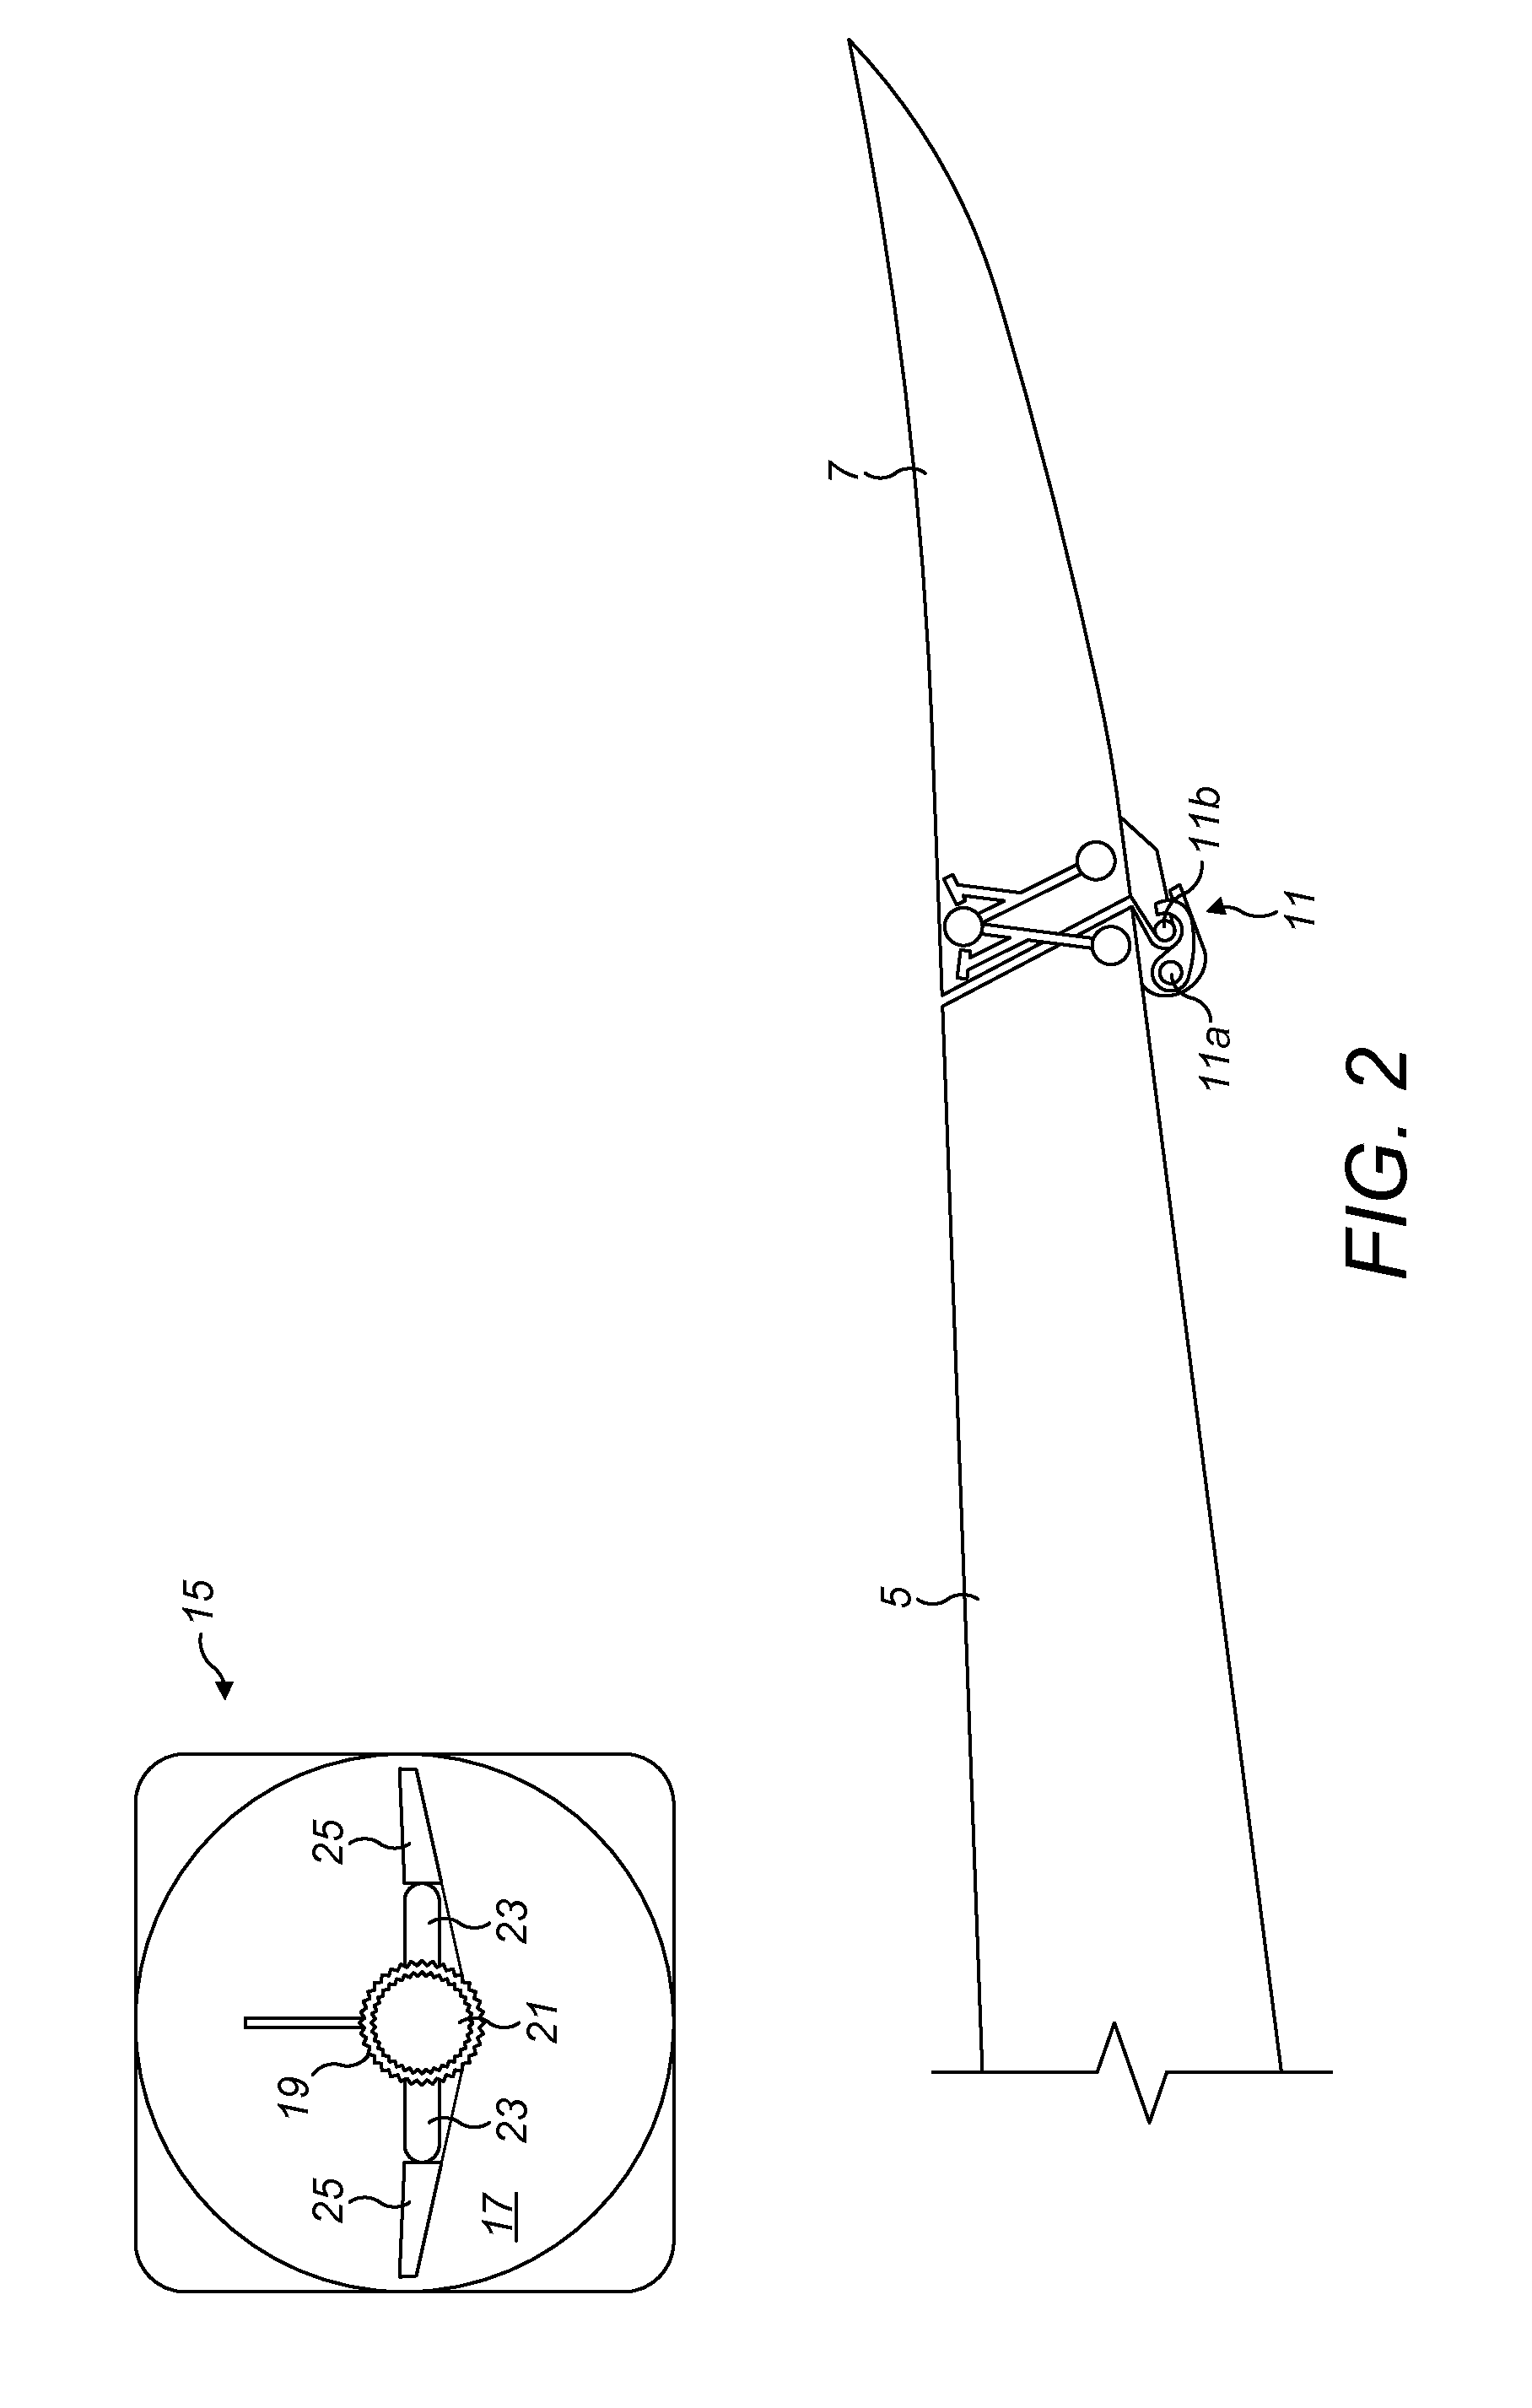 Interface for control of a foldable wing on an aircraft